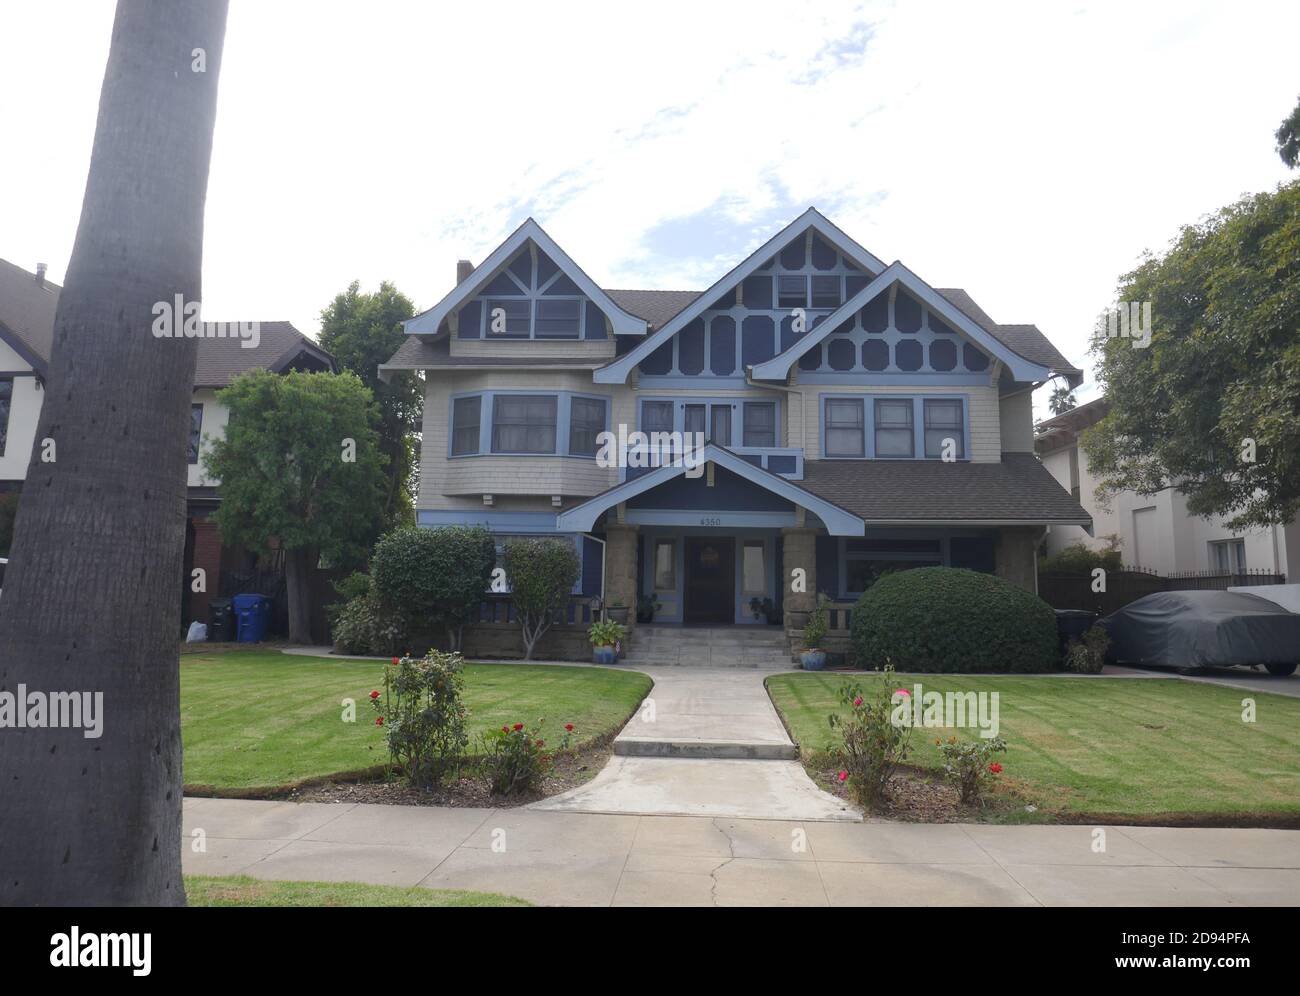 Los Angeles, California, USA 1st November 2020 A general view of atmosphere of Insidious House Filming Location at 4350 Victoria Park Drive on November 1, 2020 in Los Angeles, California, USA. Photo by Barry King/Alamy Stock Photo Stock Photo